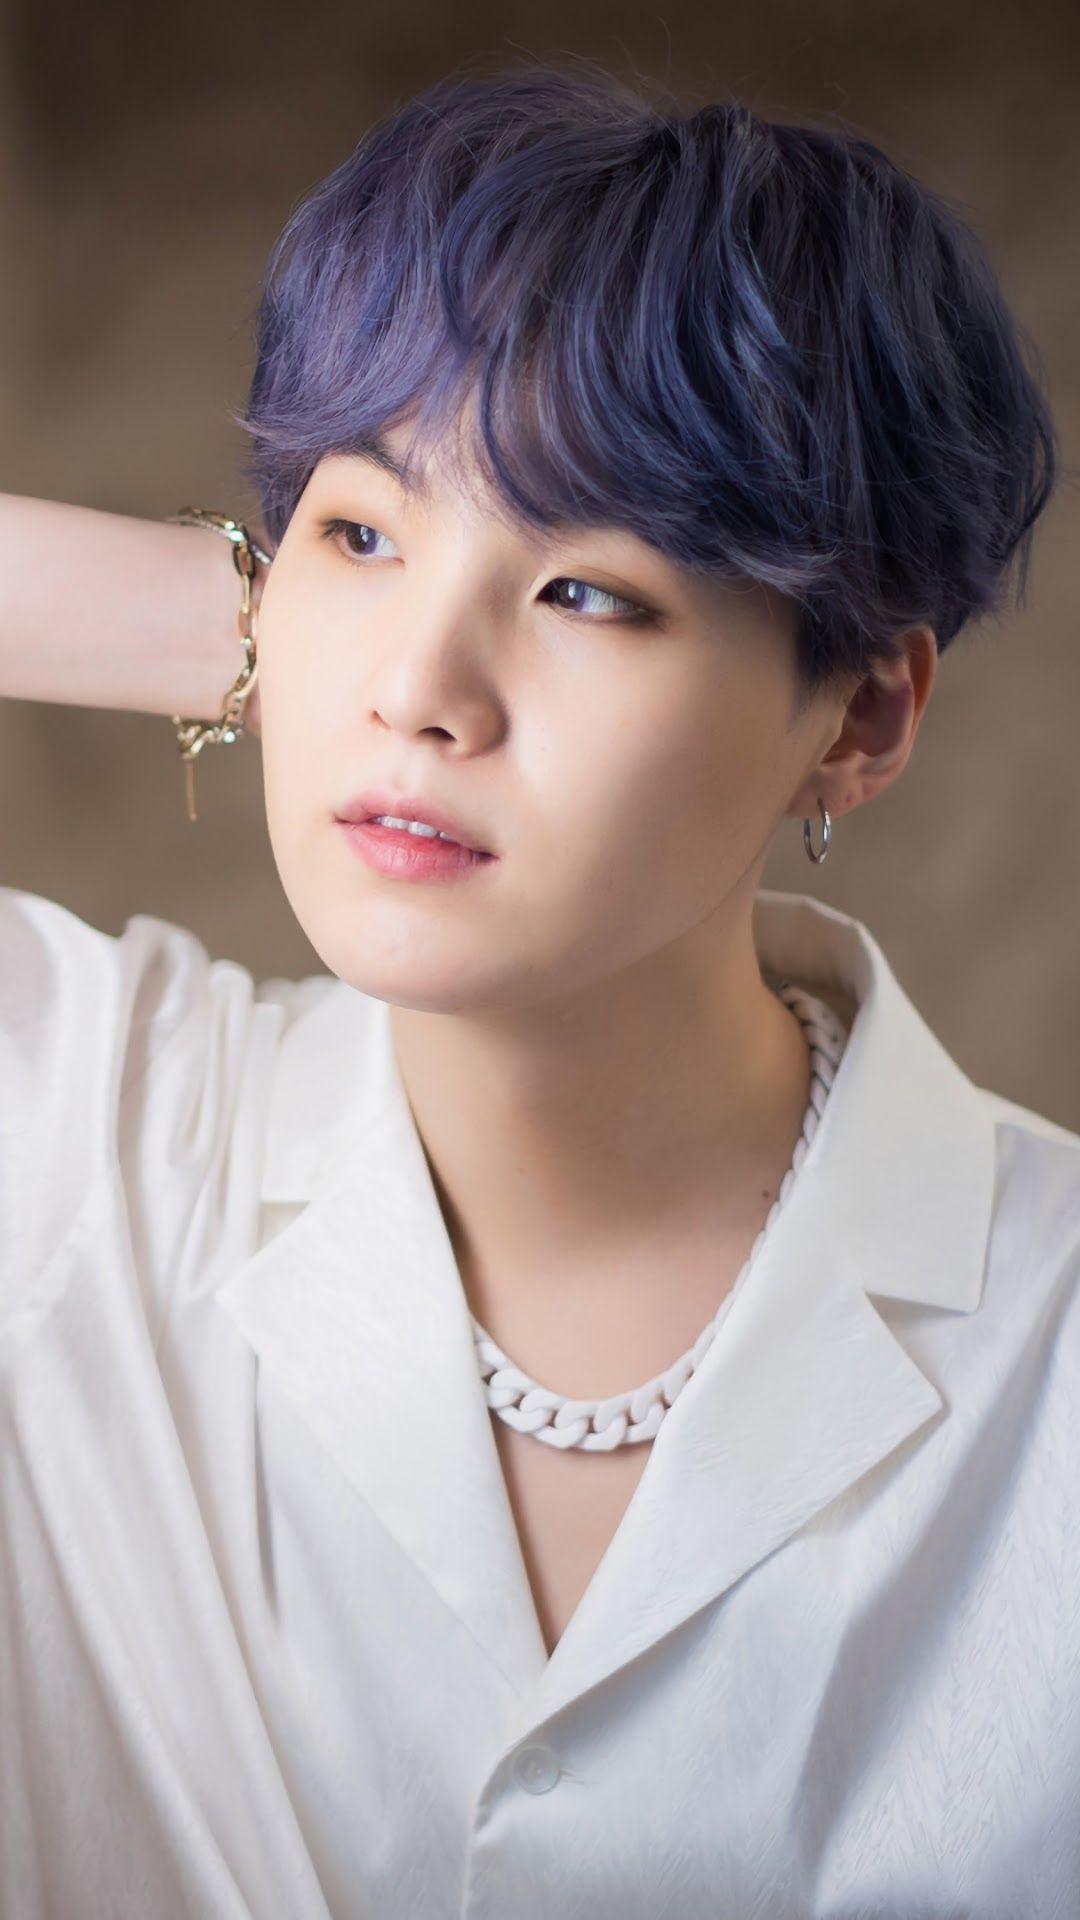 Bts Suga Wallpaper Hd Music Wallpapers K Wallpapers Images Backgrounds ...